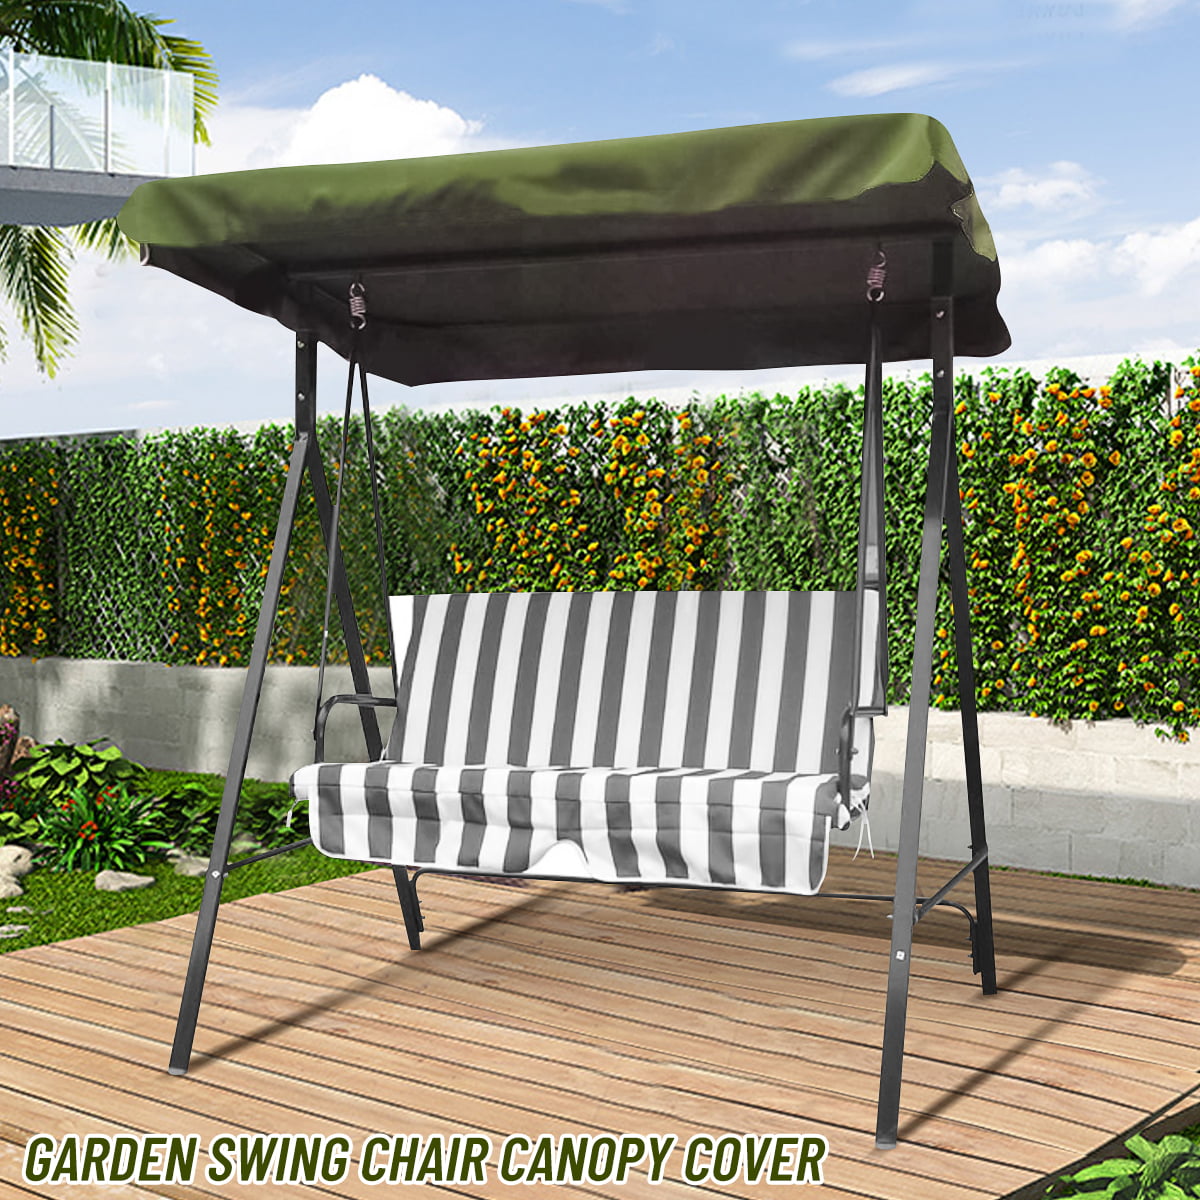 Water Resistant 3 Seater Replacement Canopy ONLY for Swing Seat/Garden Hammock in Olive Green